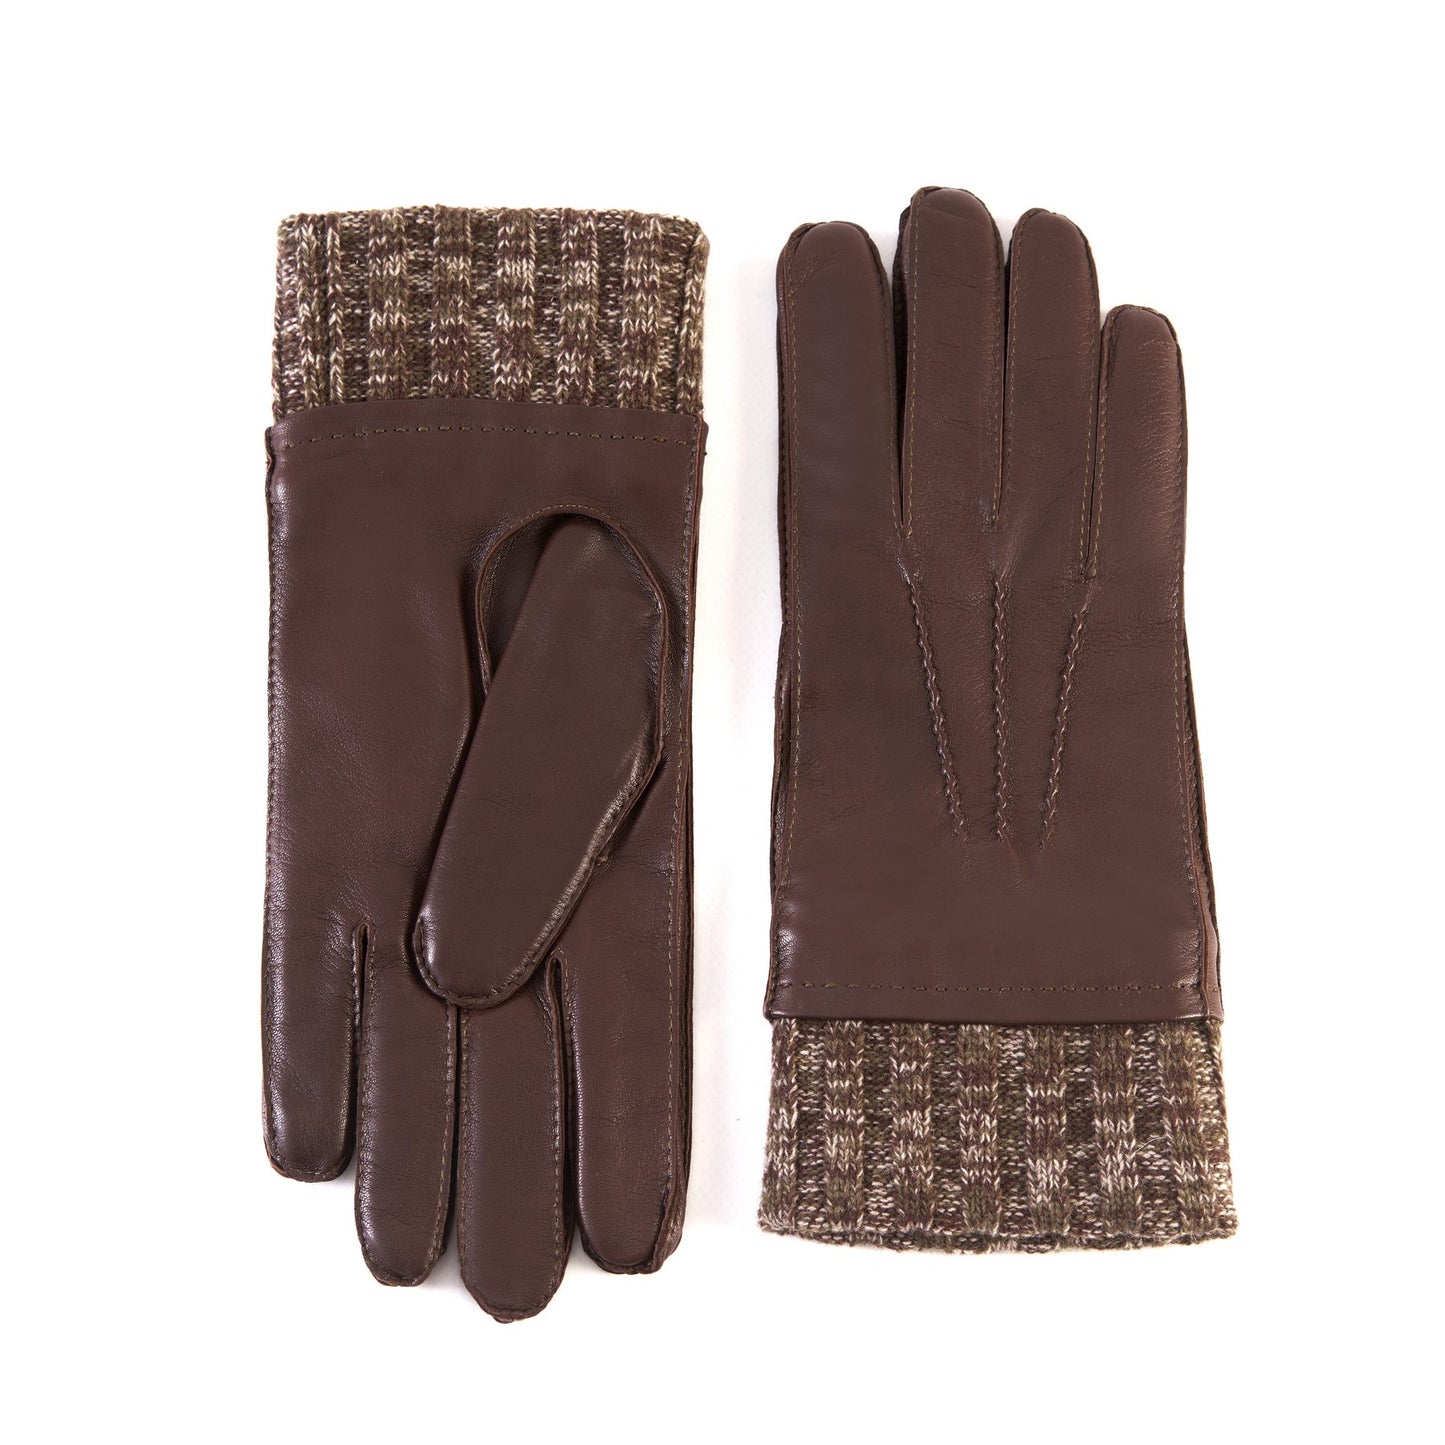 Men's brown nappa leather gloves with cashmere lining and wool cuff